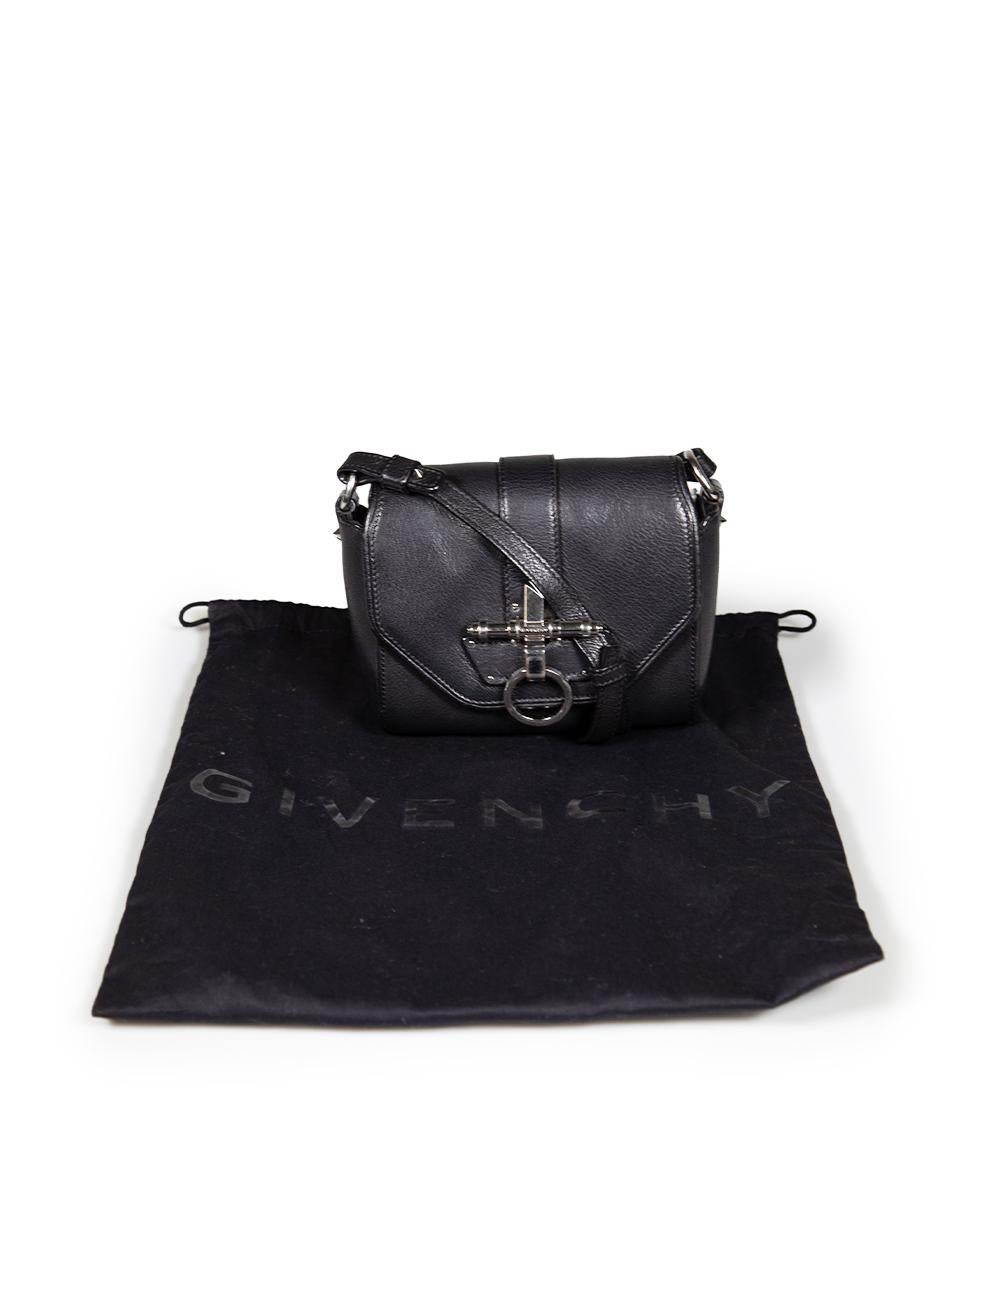 Givenchy Black Leather Obsedia Crossbody Bag For Sale 3